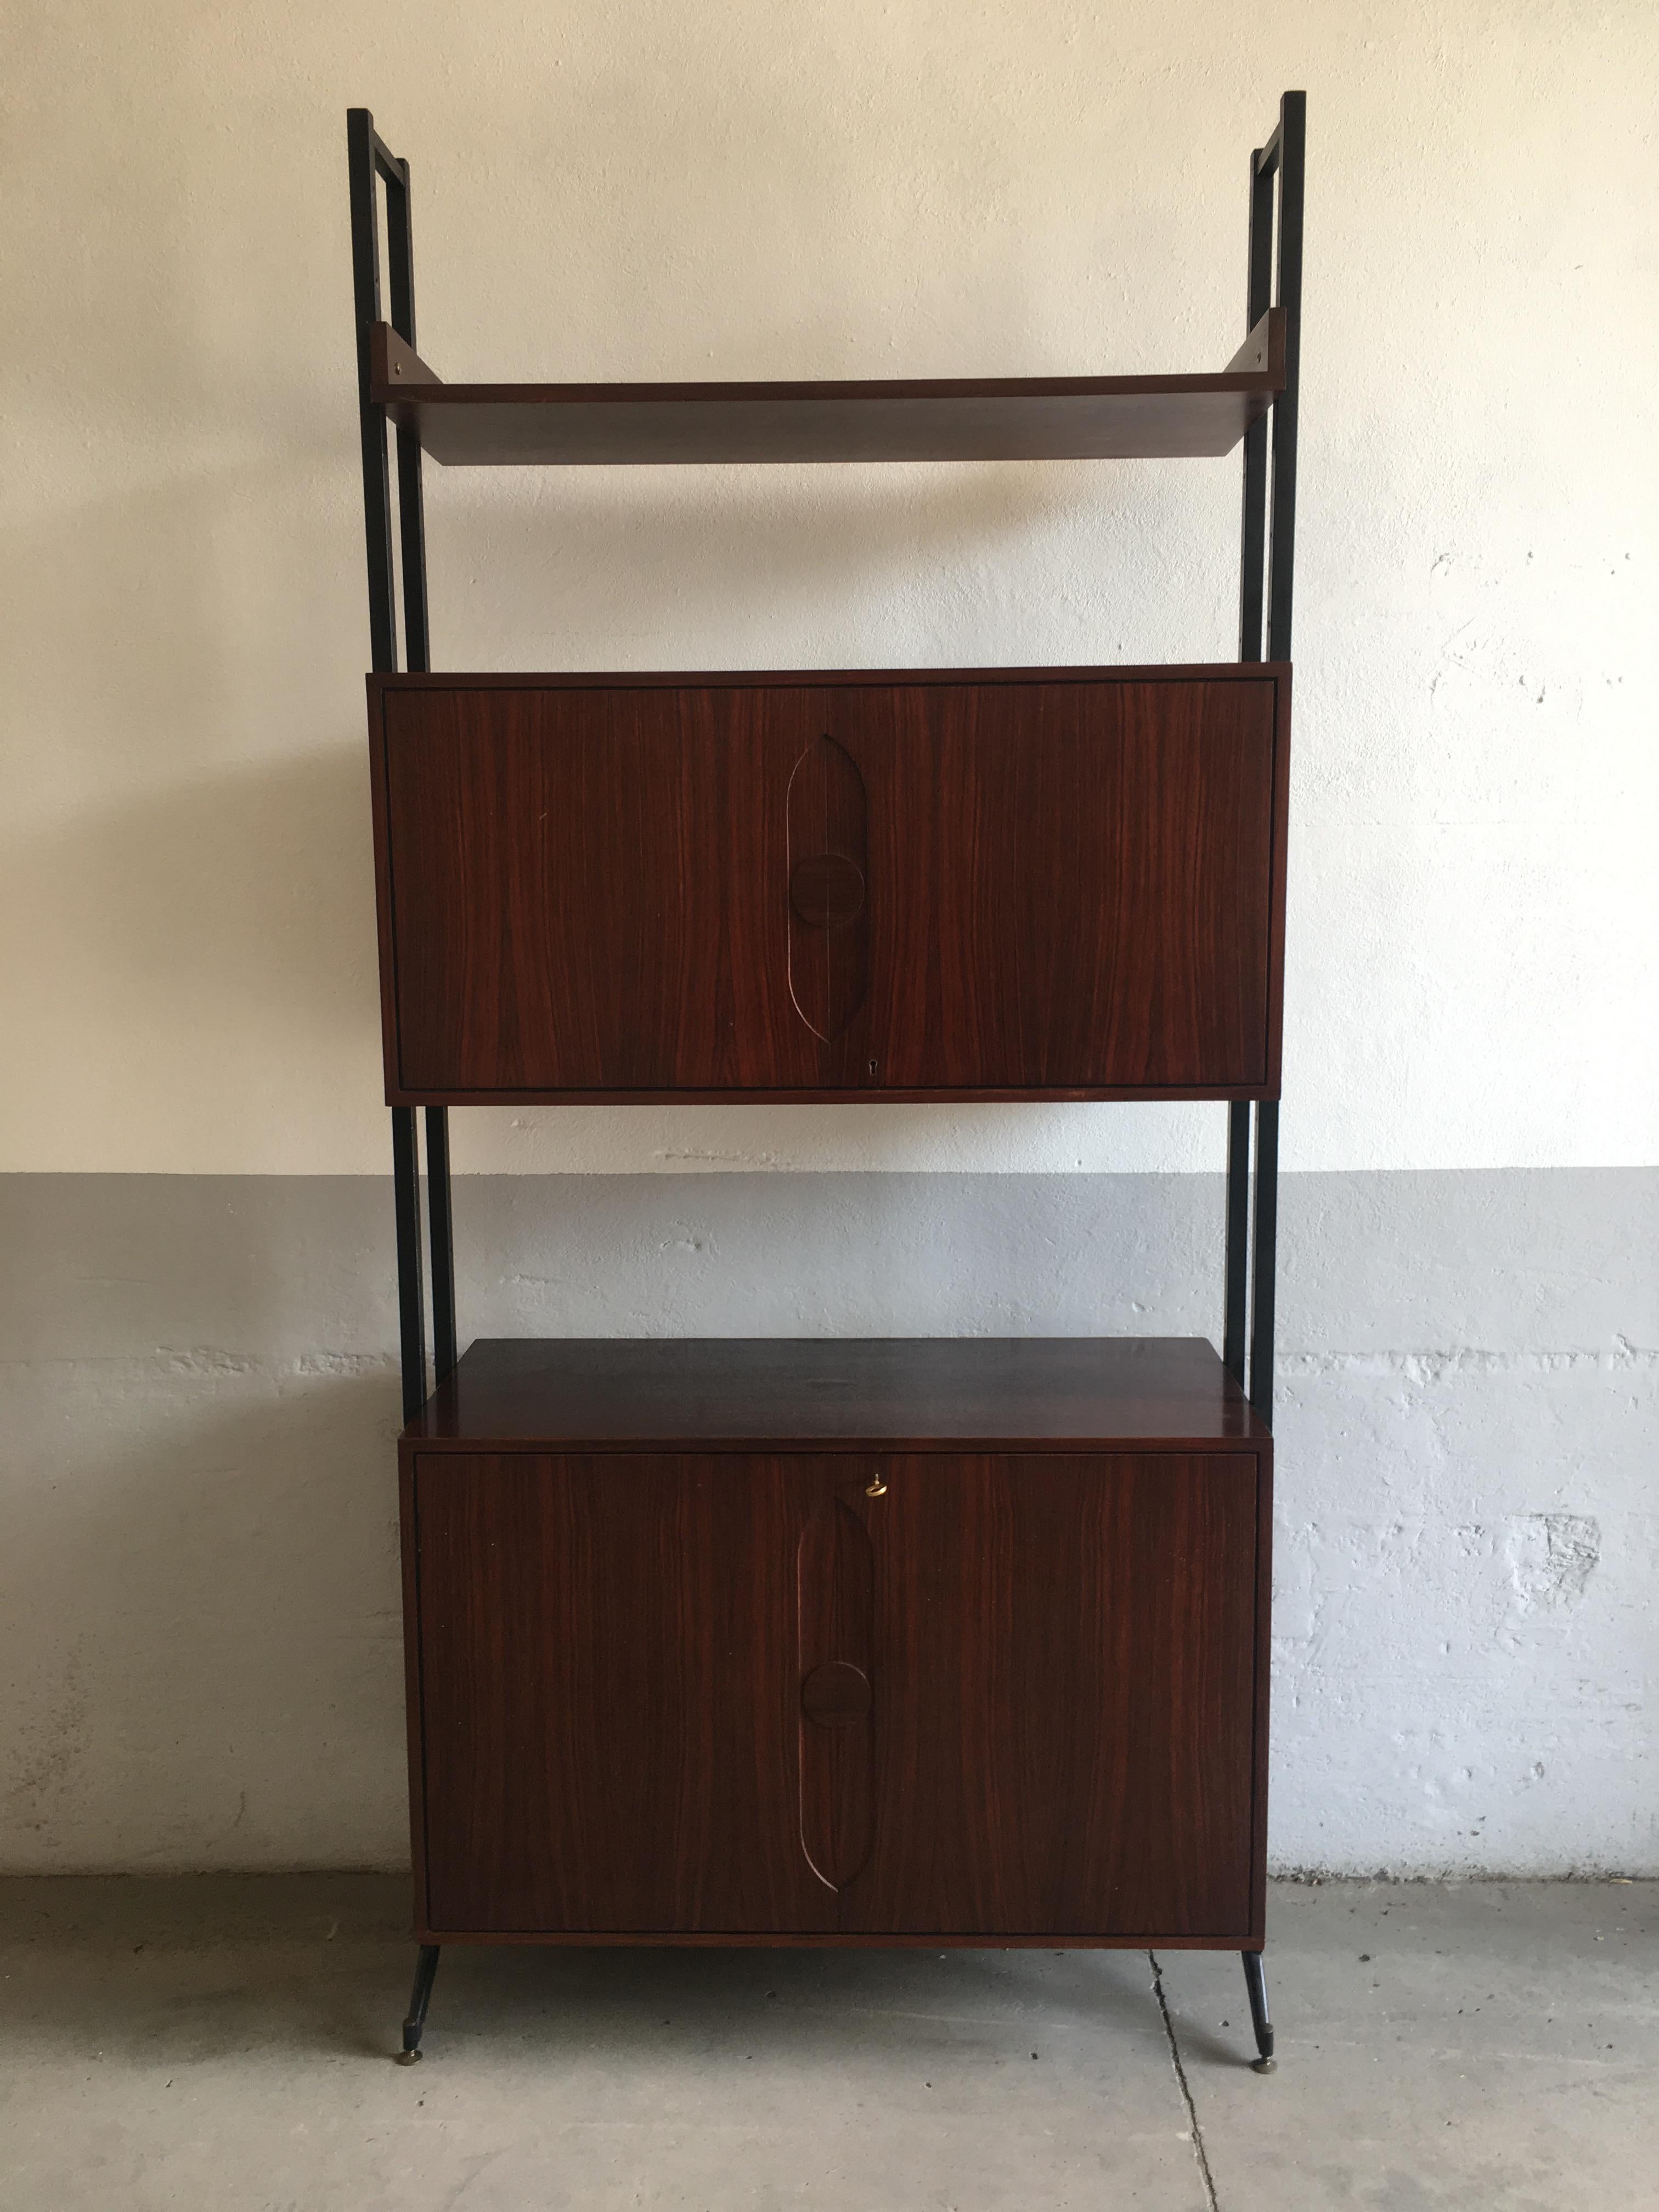 Mid-Century Modern Danish mahogany self-supporting wood bookcase with a solid black steel frame.